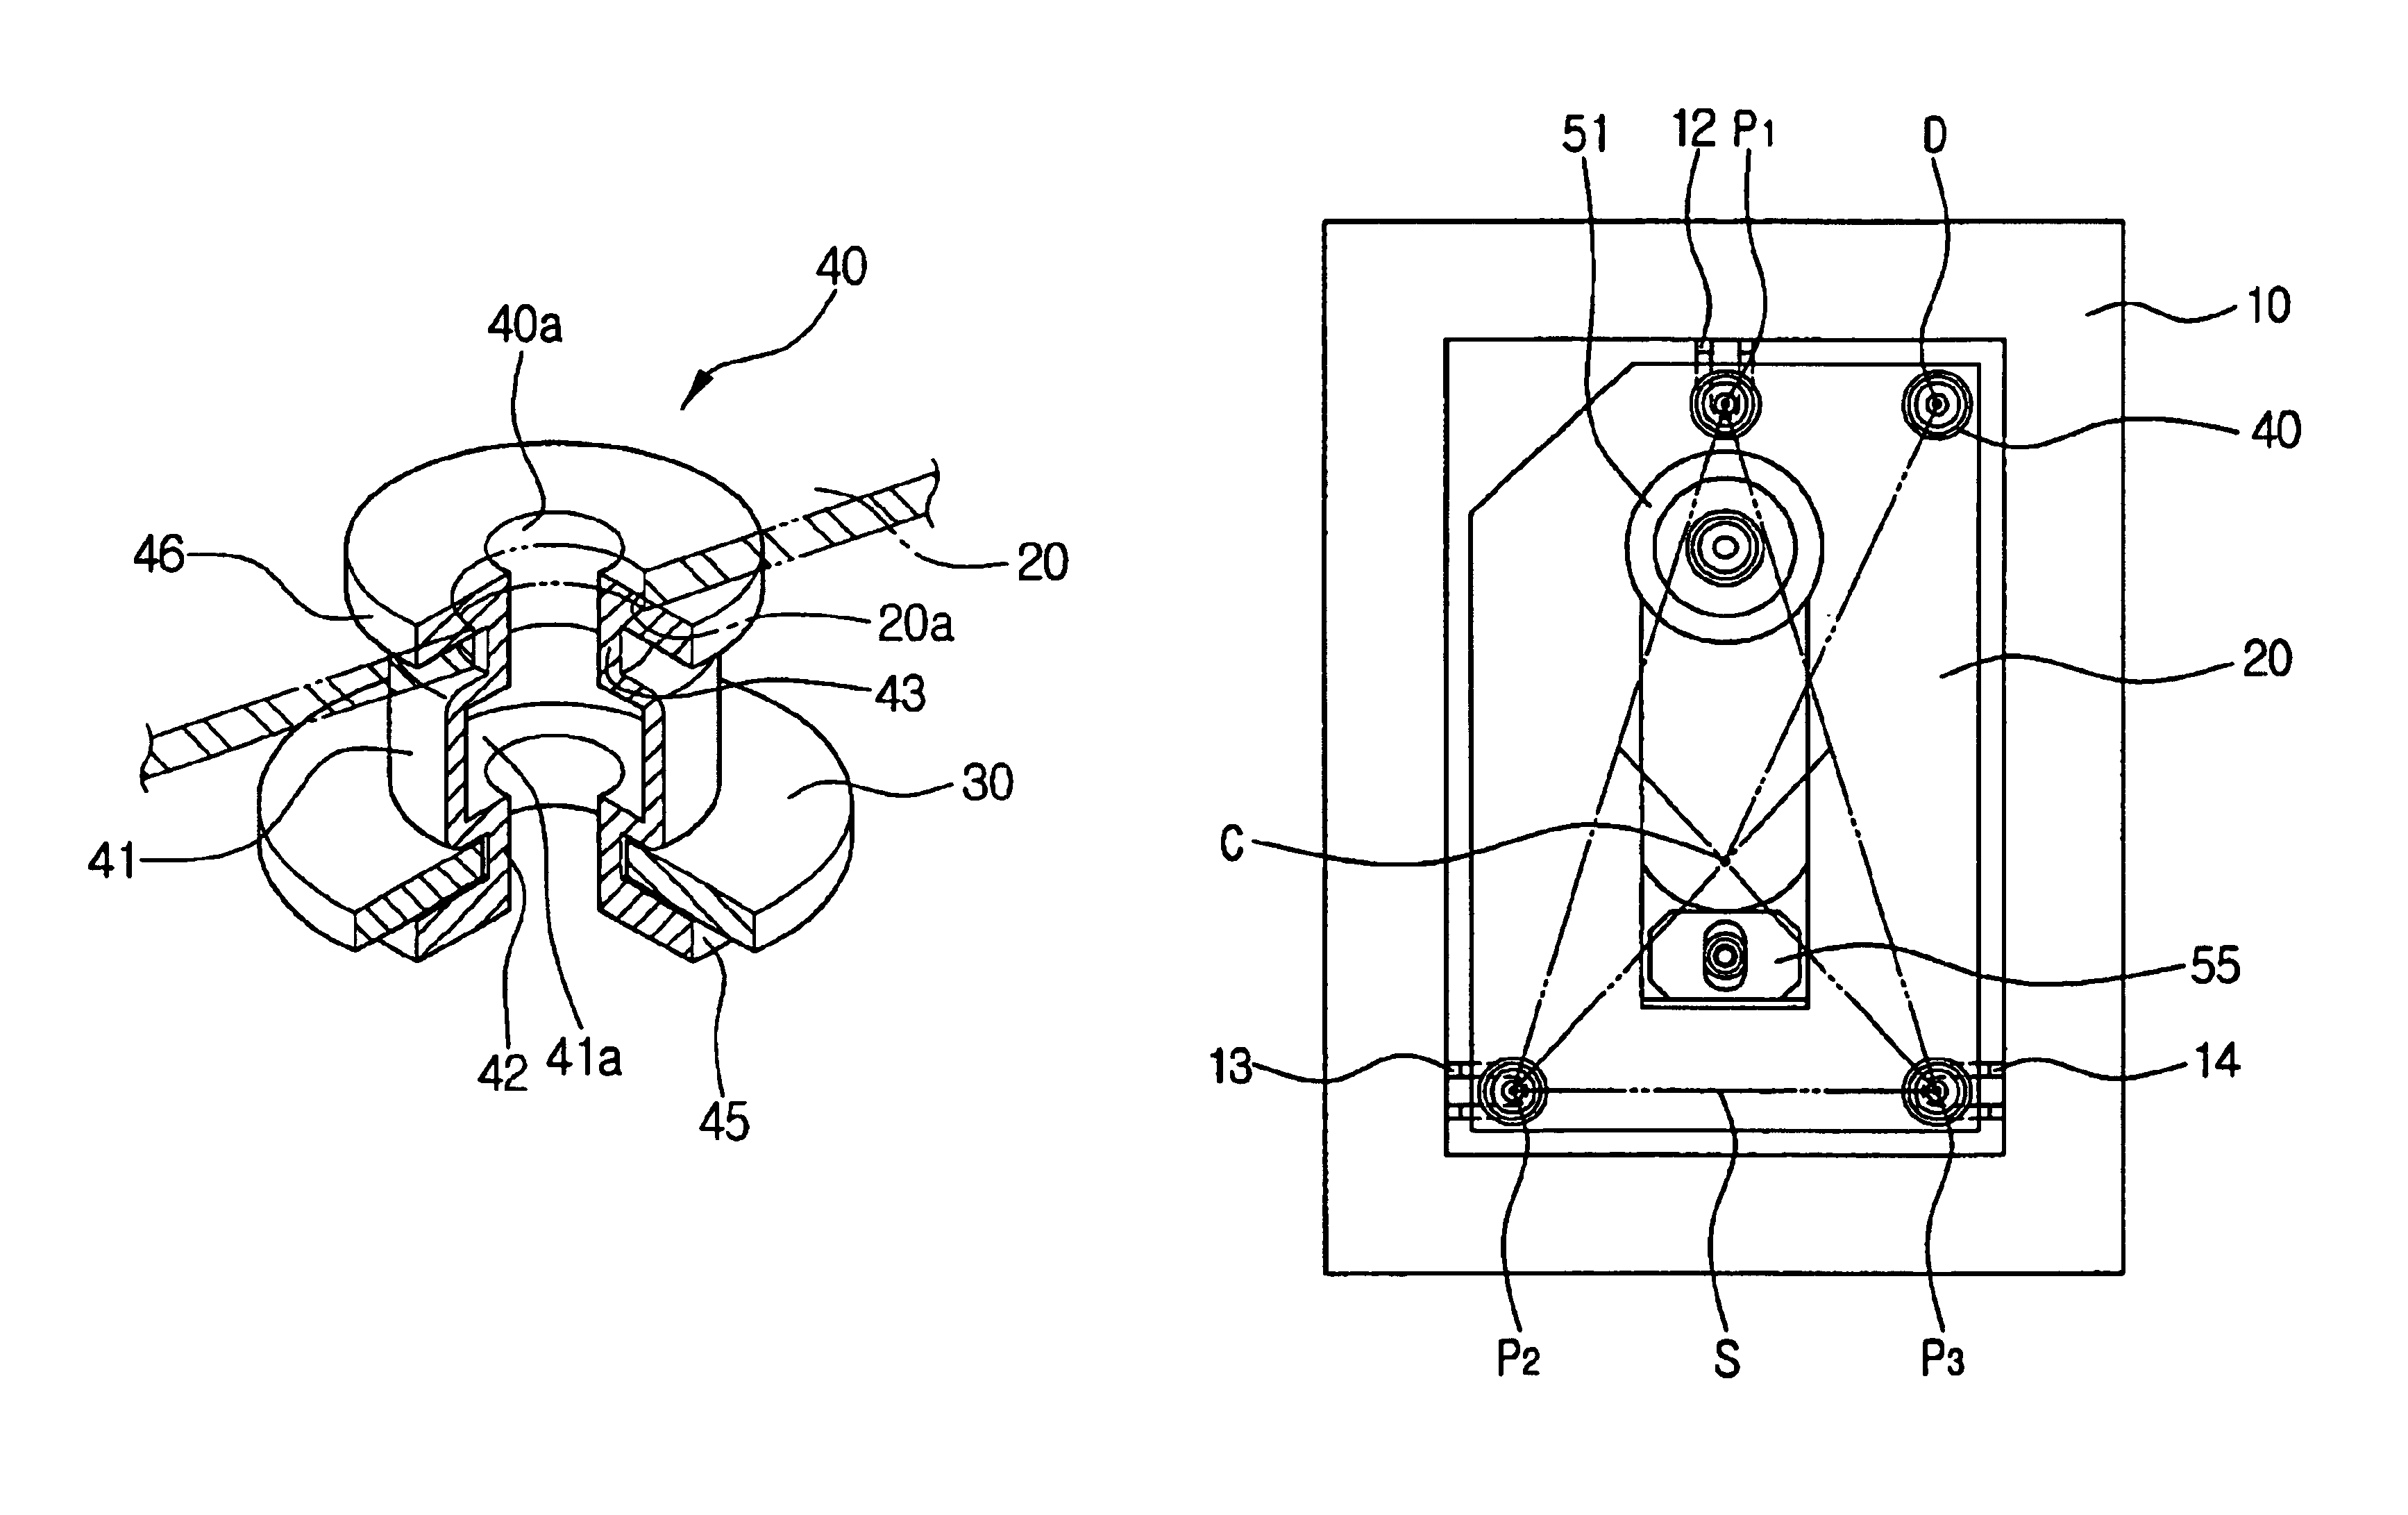 Dynamic vibration absorber for a disk player